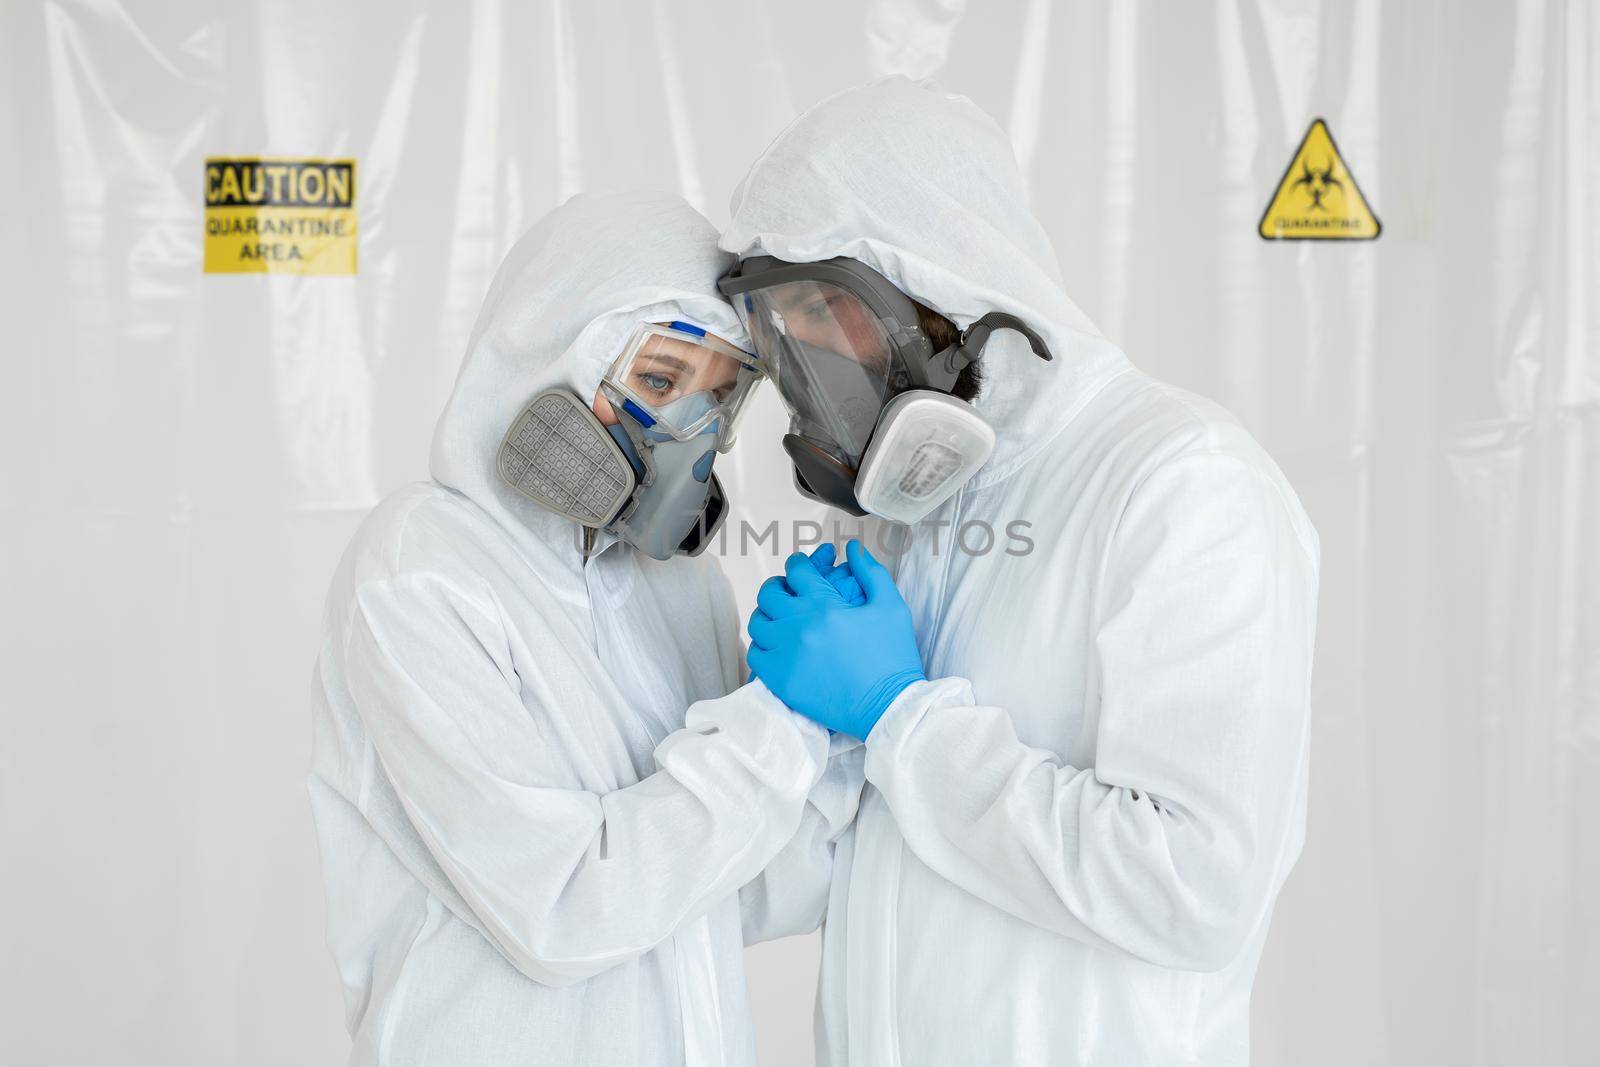 Portraits of the doctor: a man and a woman in protective suits and respirators holding hands during quarantine. Covid-19.